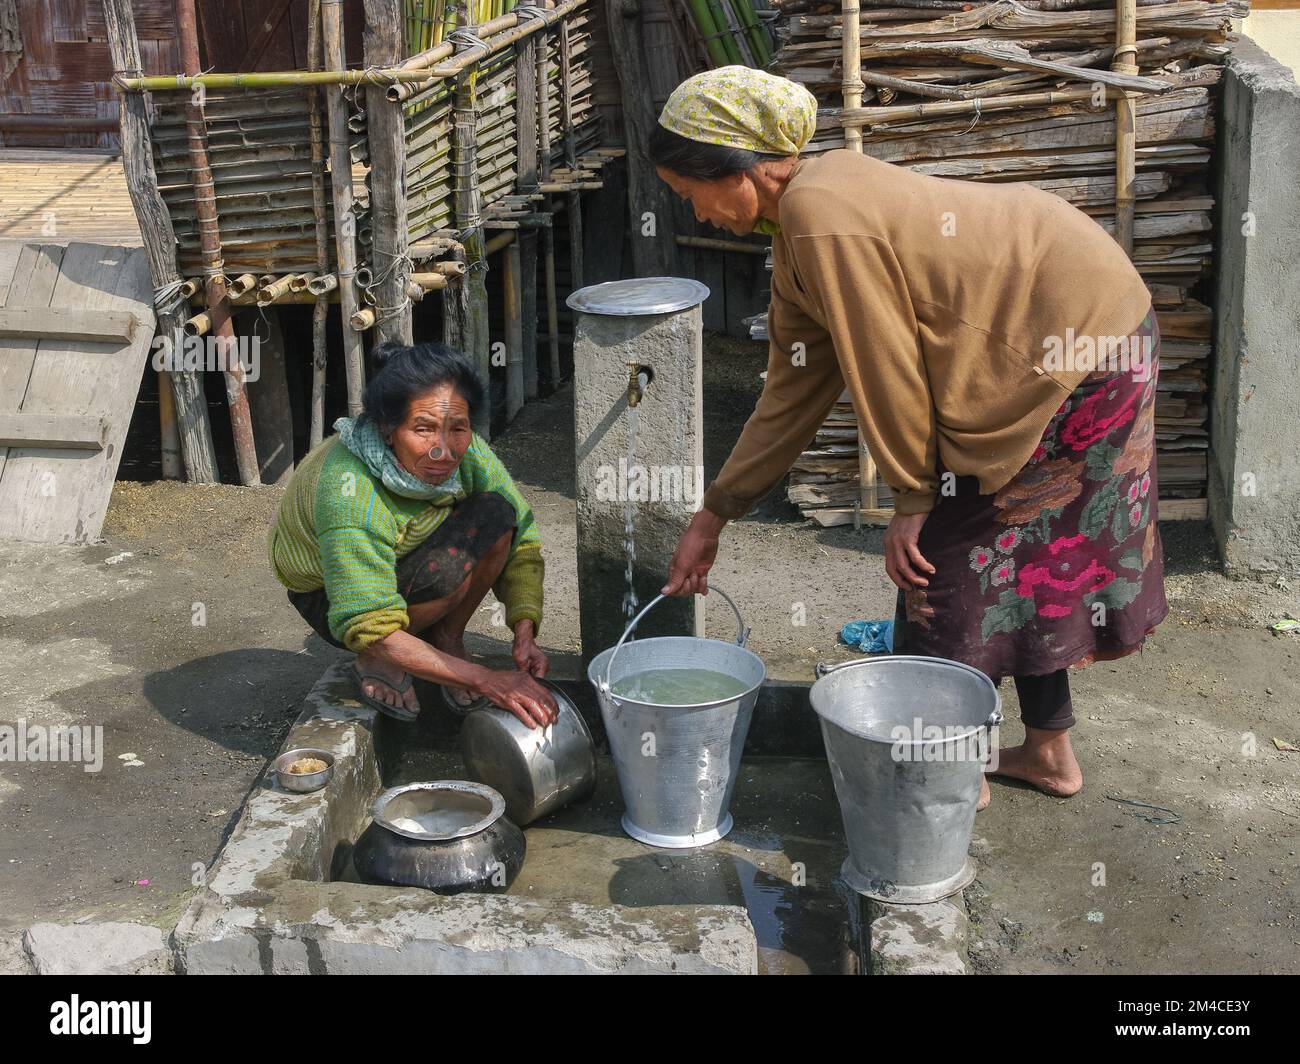 Ziro, Arunachal Pradesh, India - 03 04 2014 : Local Apatani tribal women with traditional facial tattoos and nose plugs cleaning pots at village tap Stock Photo